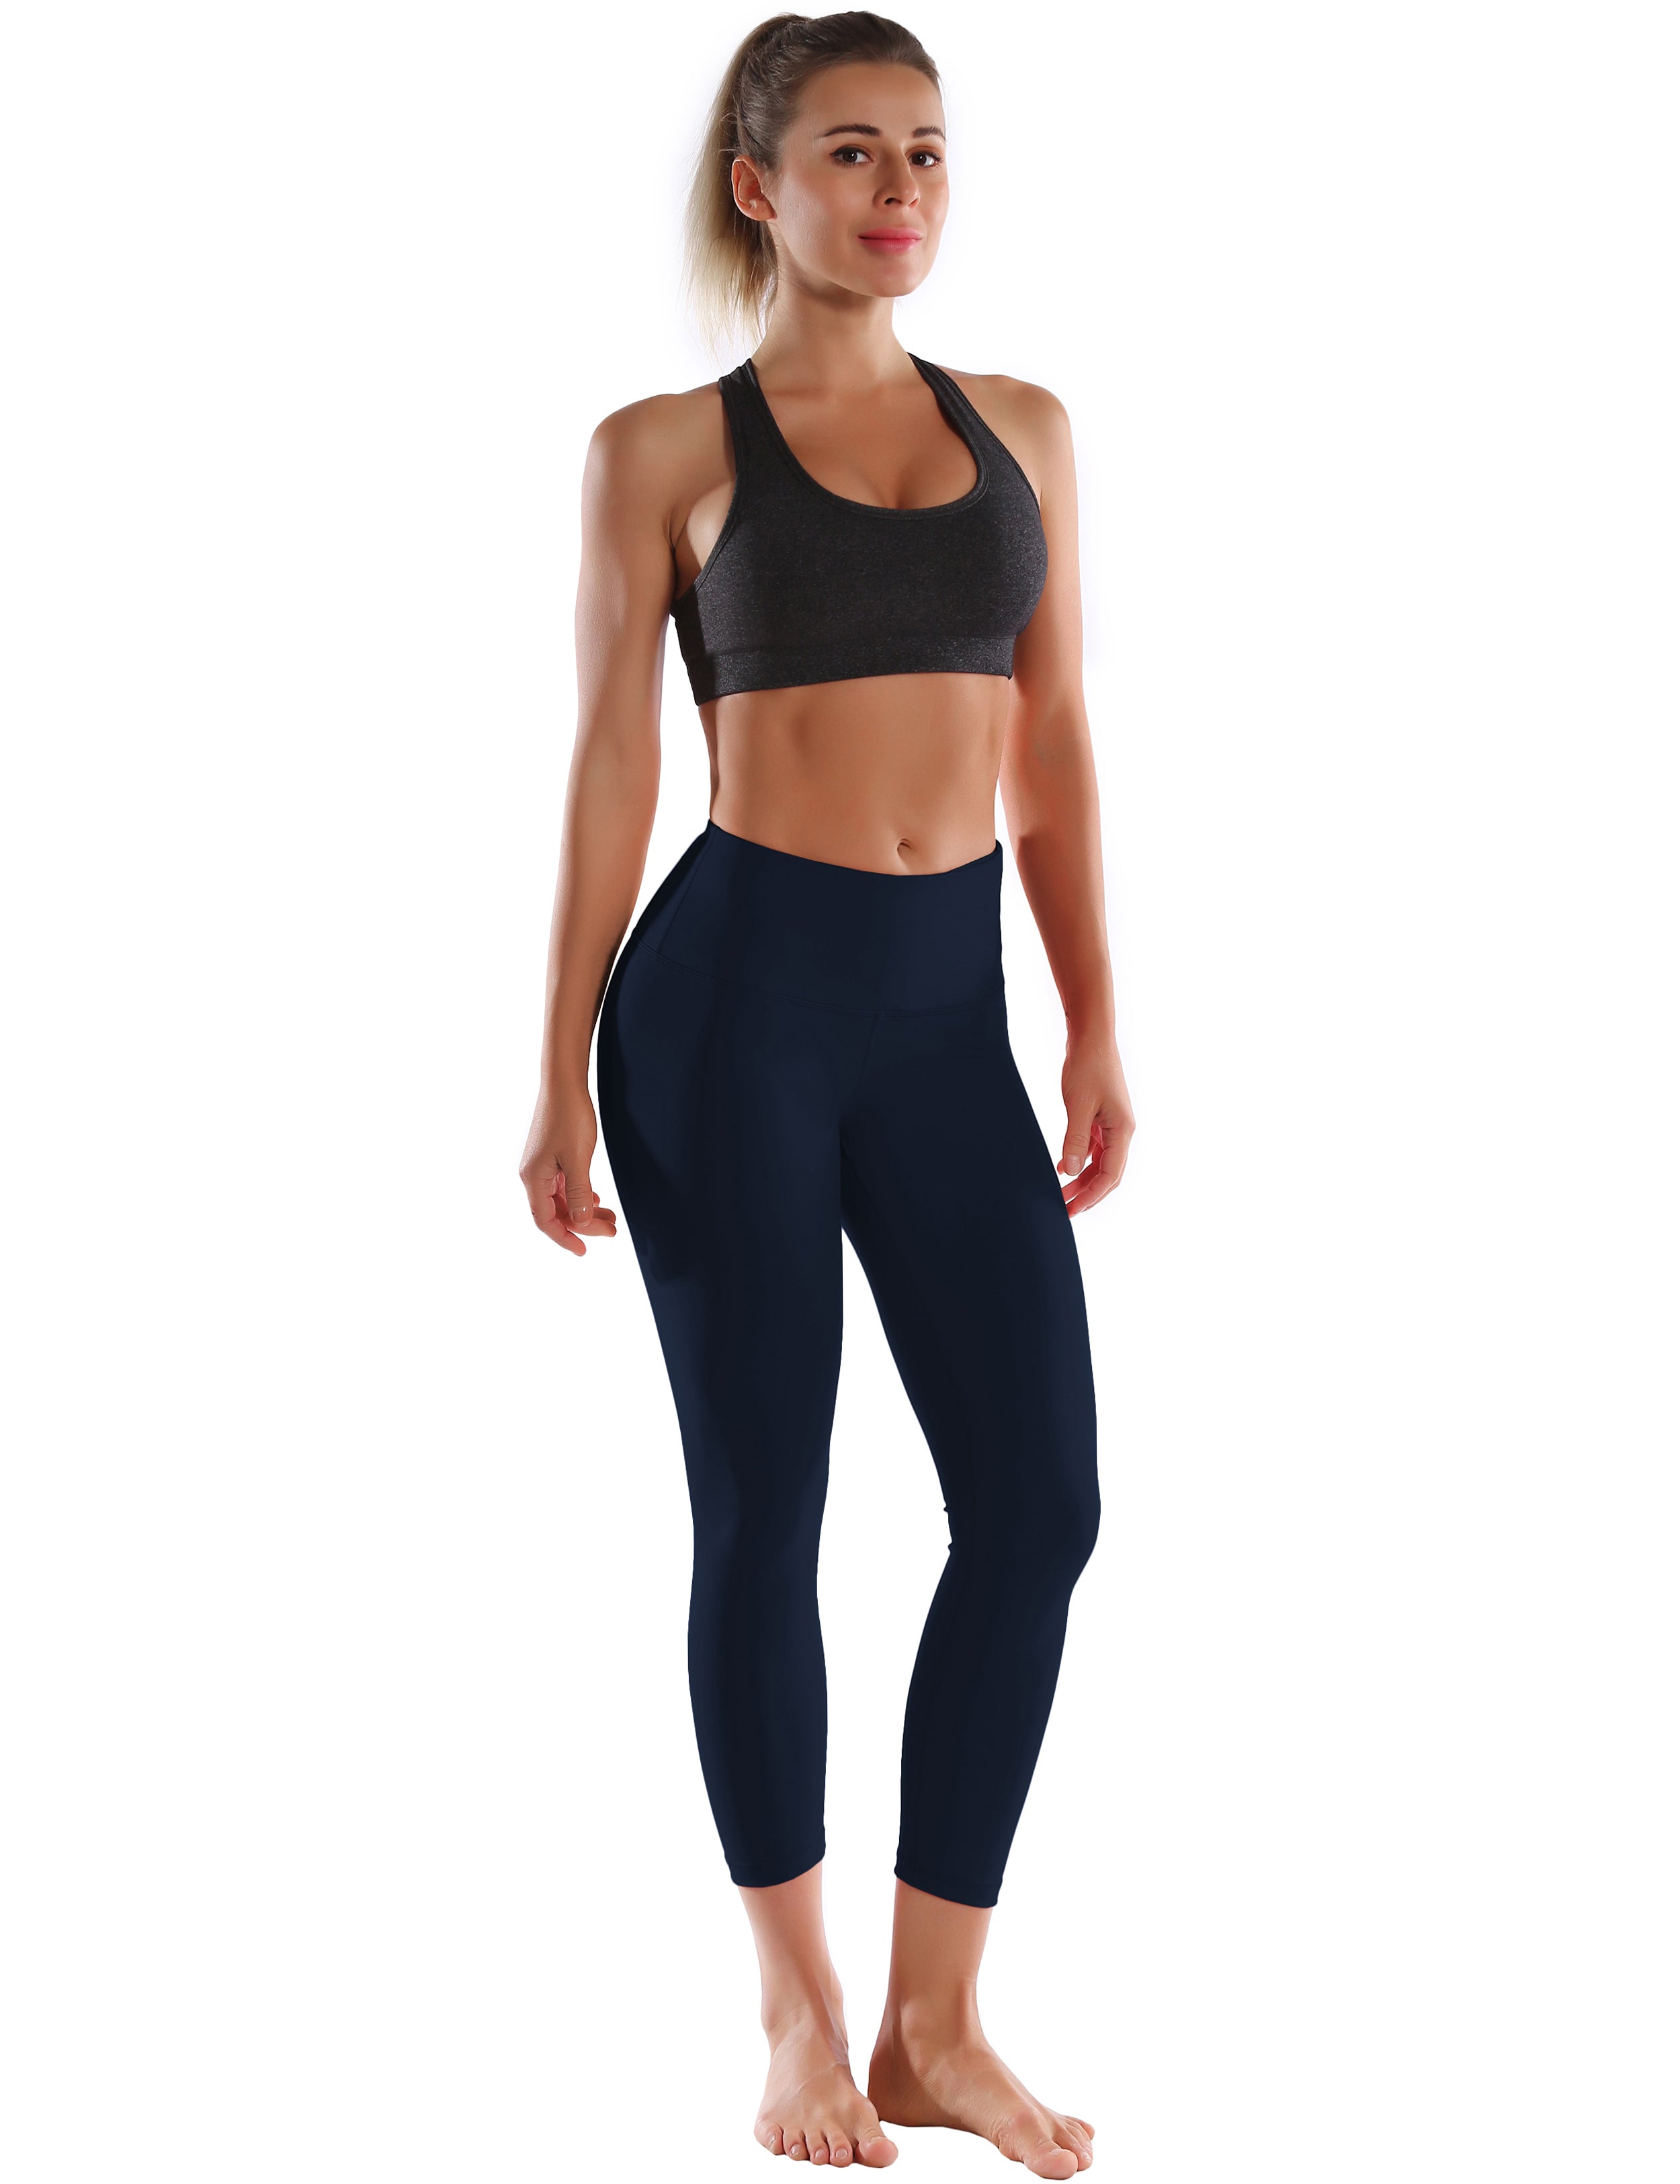 22" High Waist Crop Tight Capris darknavy 75%Nylon/25%Spandex Fabric doesn't attract lint easily 4-way stretch No see-through Moisture-wicking Tummy control Inner pocket